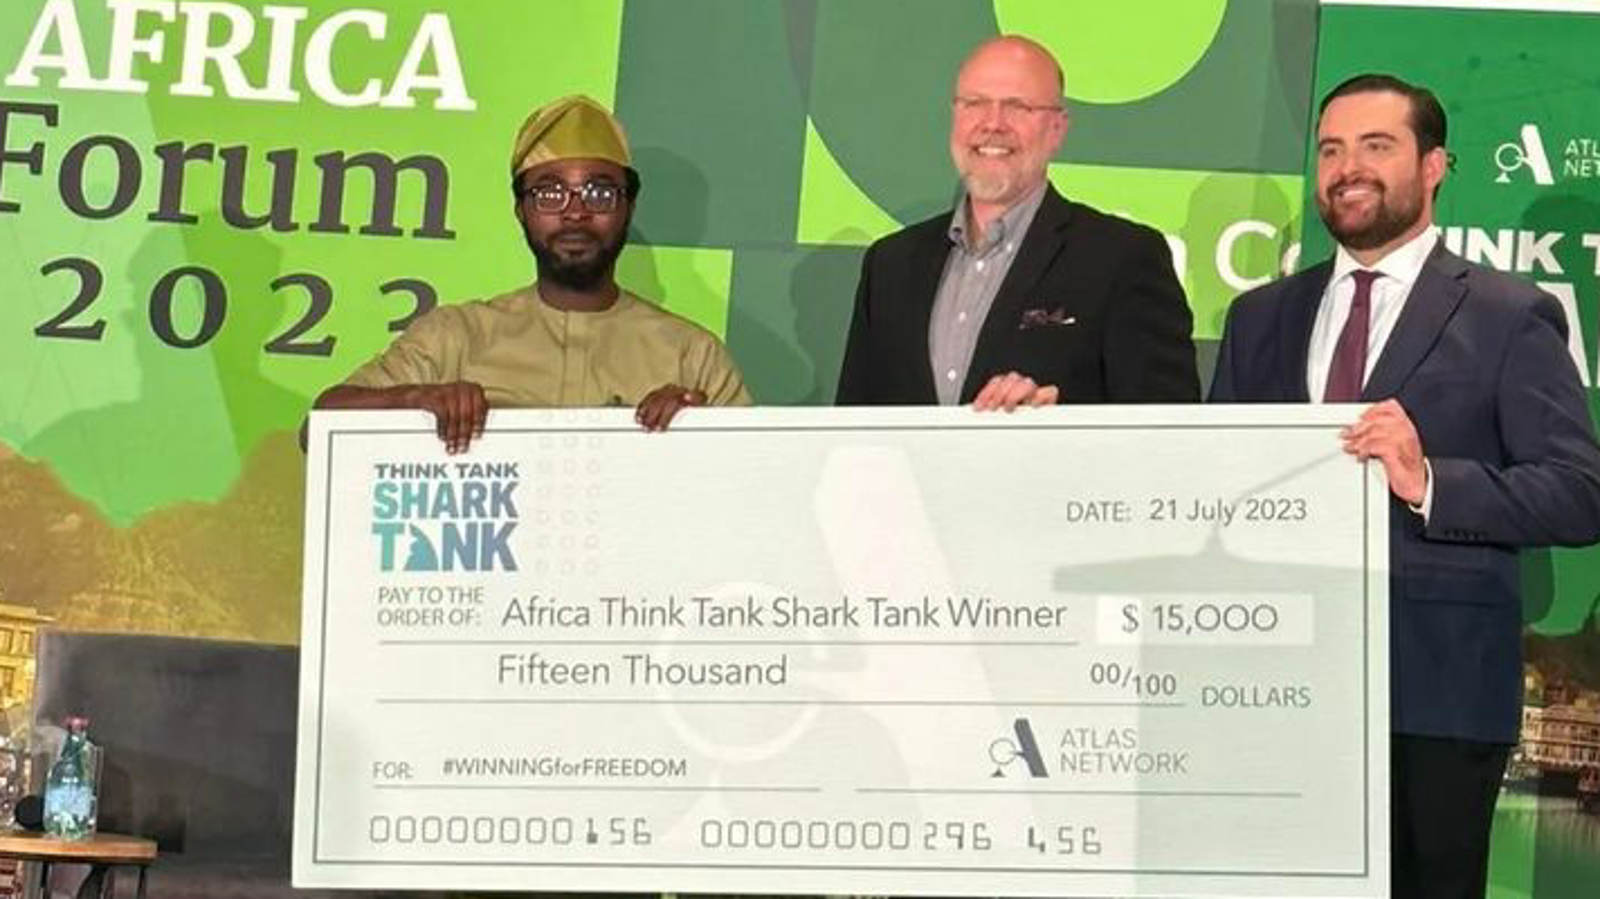 Lanre-Peter Elufisan, a Students For Liberty alumnus from Nigeria, won the Atlas Network's 2023 Africa Think Tank Shark Tank Competition